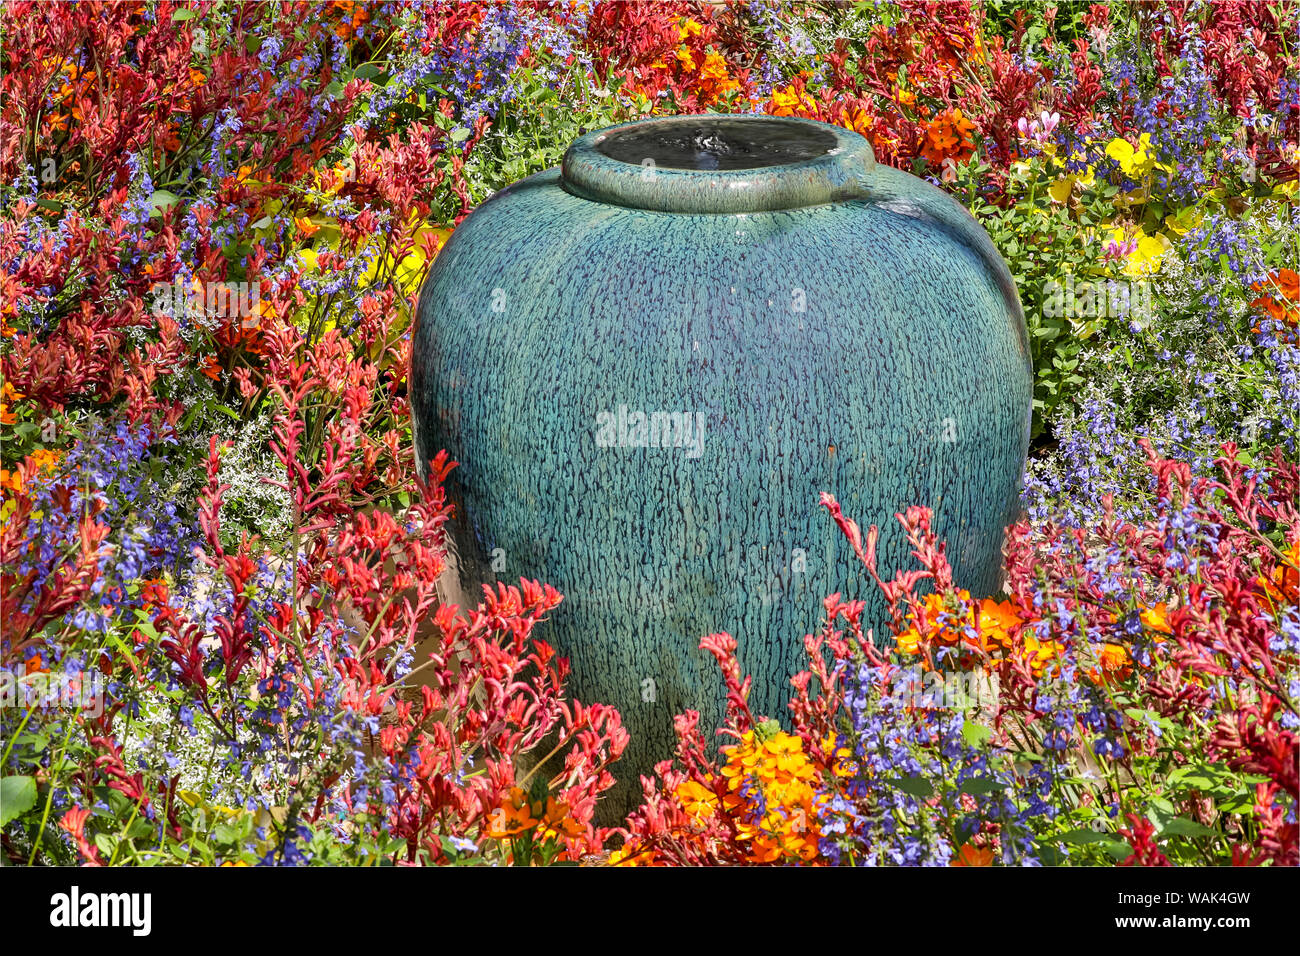 Flower pot in field of flowers at Longwood Gardens Conservatory, Pennsylvania Stock Photo